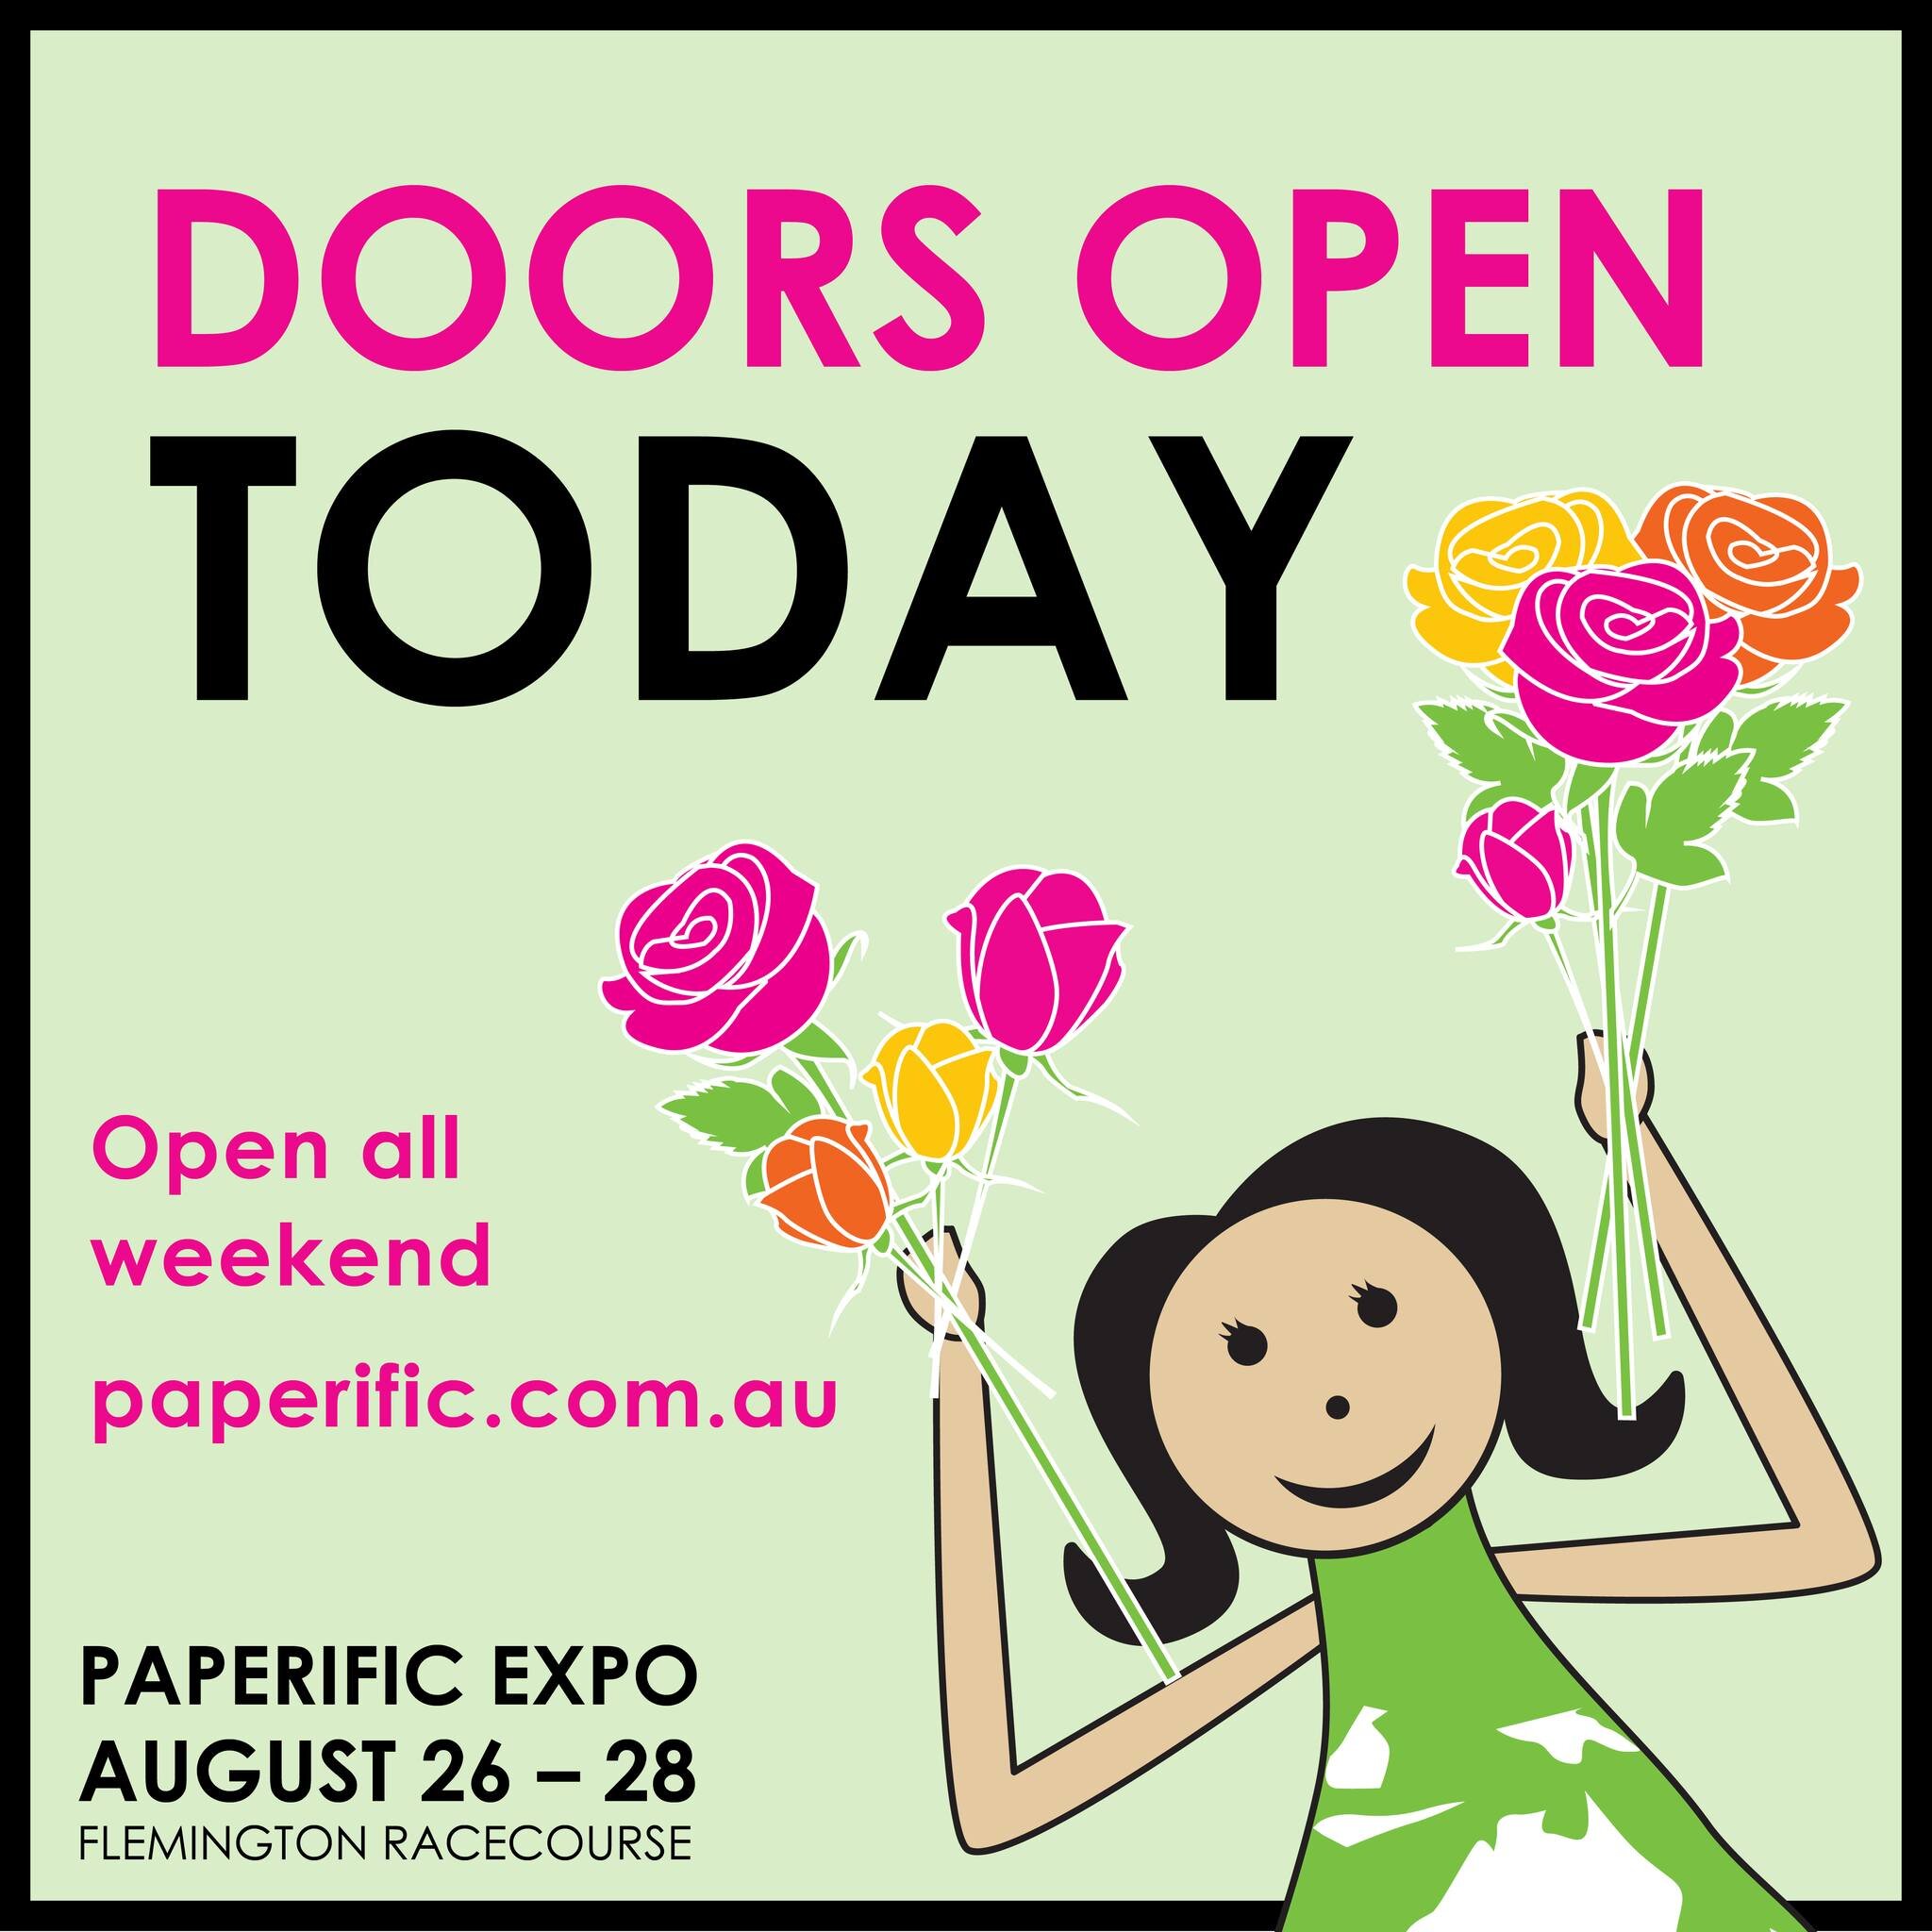 Paperific is now open for the next three days! Make &amp; Takes, mini classes, workshops, demonstration and shopping! From 9:30 to 4pm at Flemington Racecourse (Victorian Racing Club). We can't wait to see you! 
.
.
#Paperific2023 #Paperific #Scrapbo